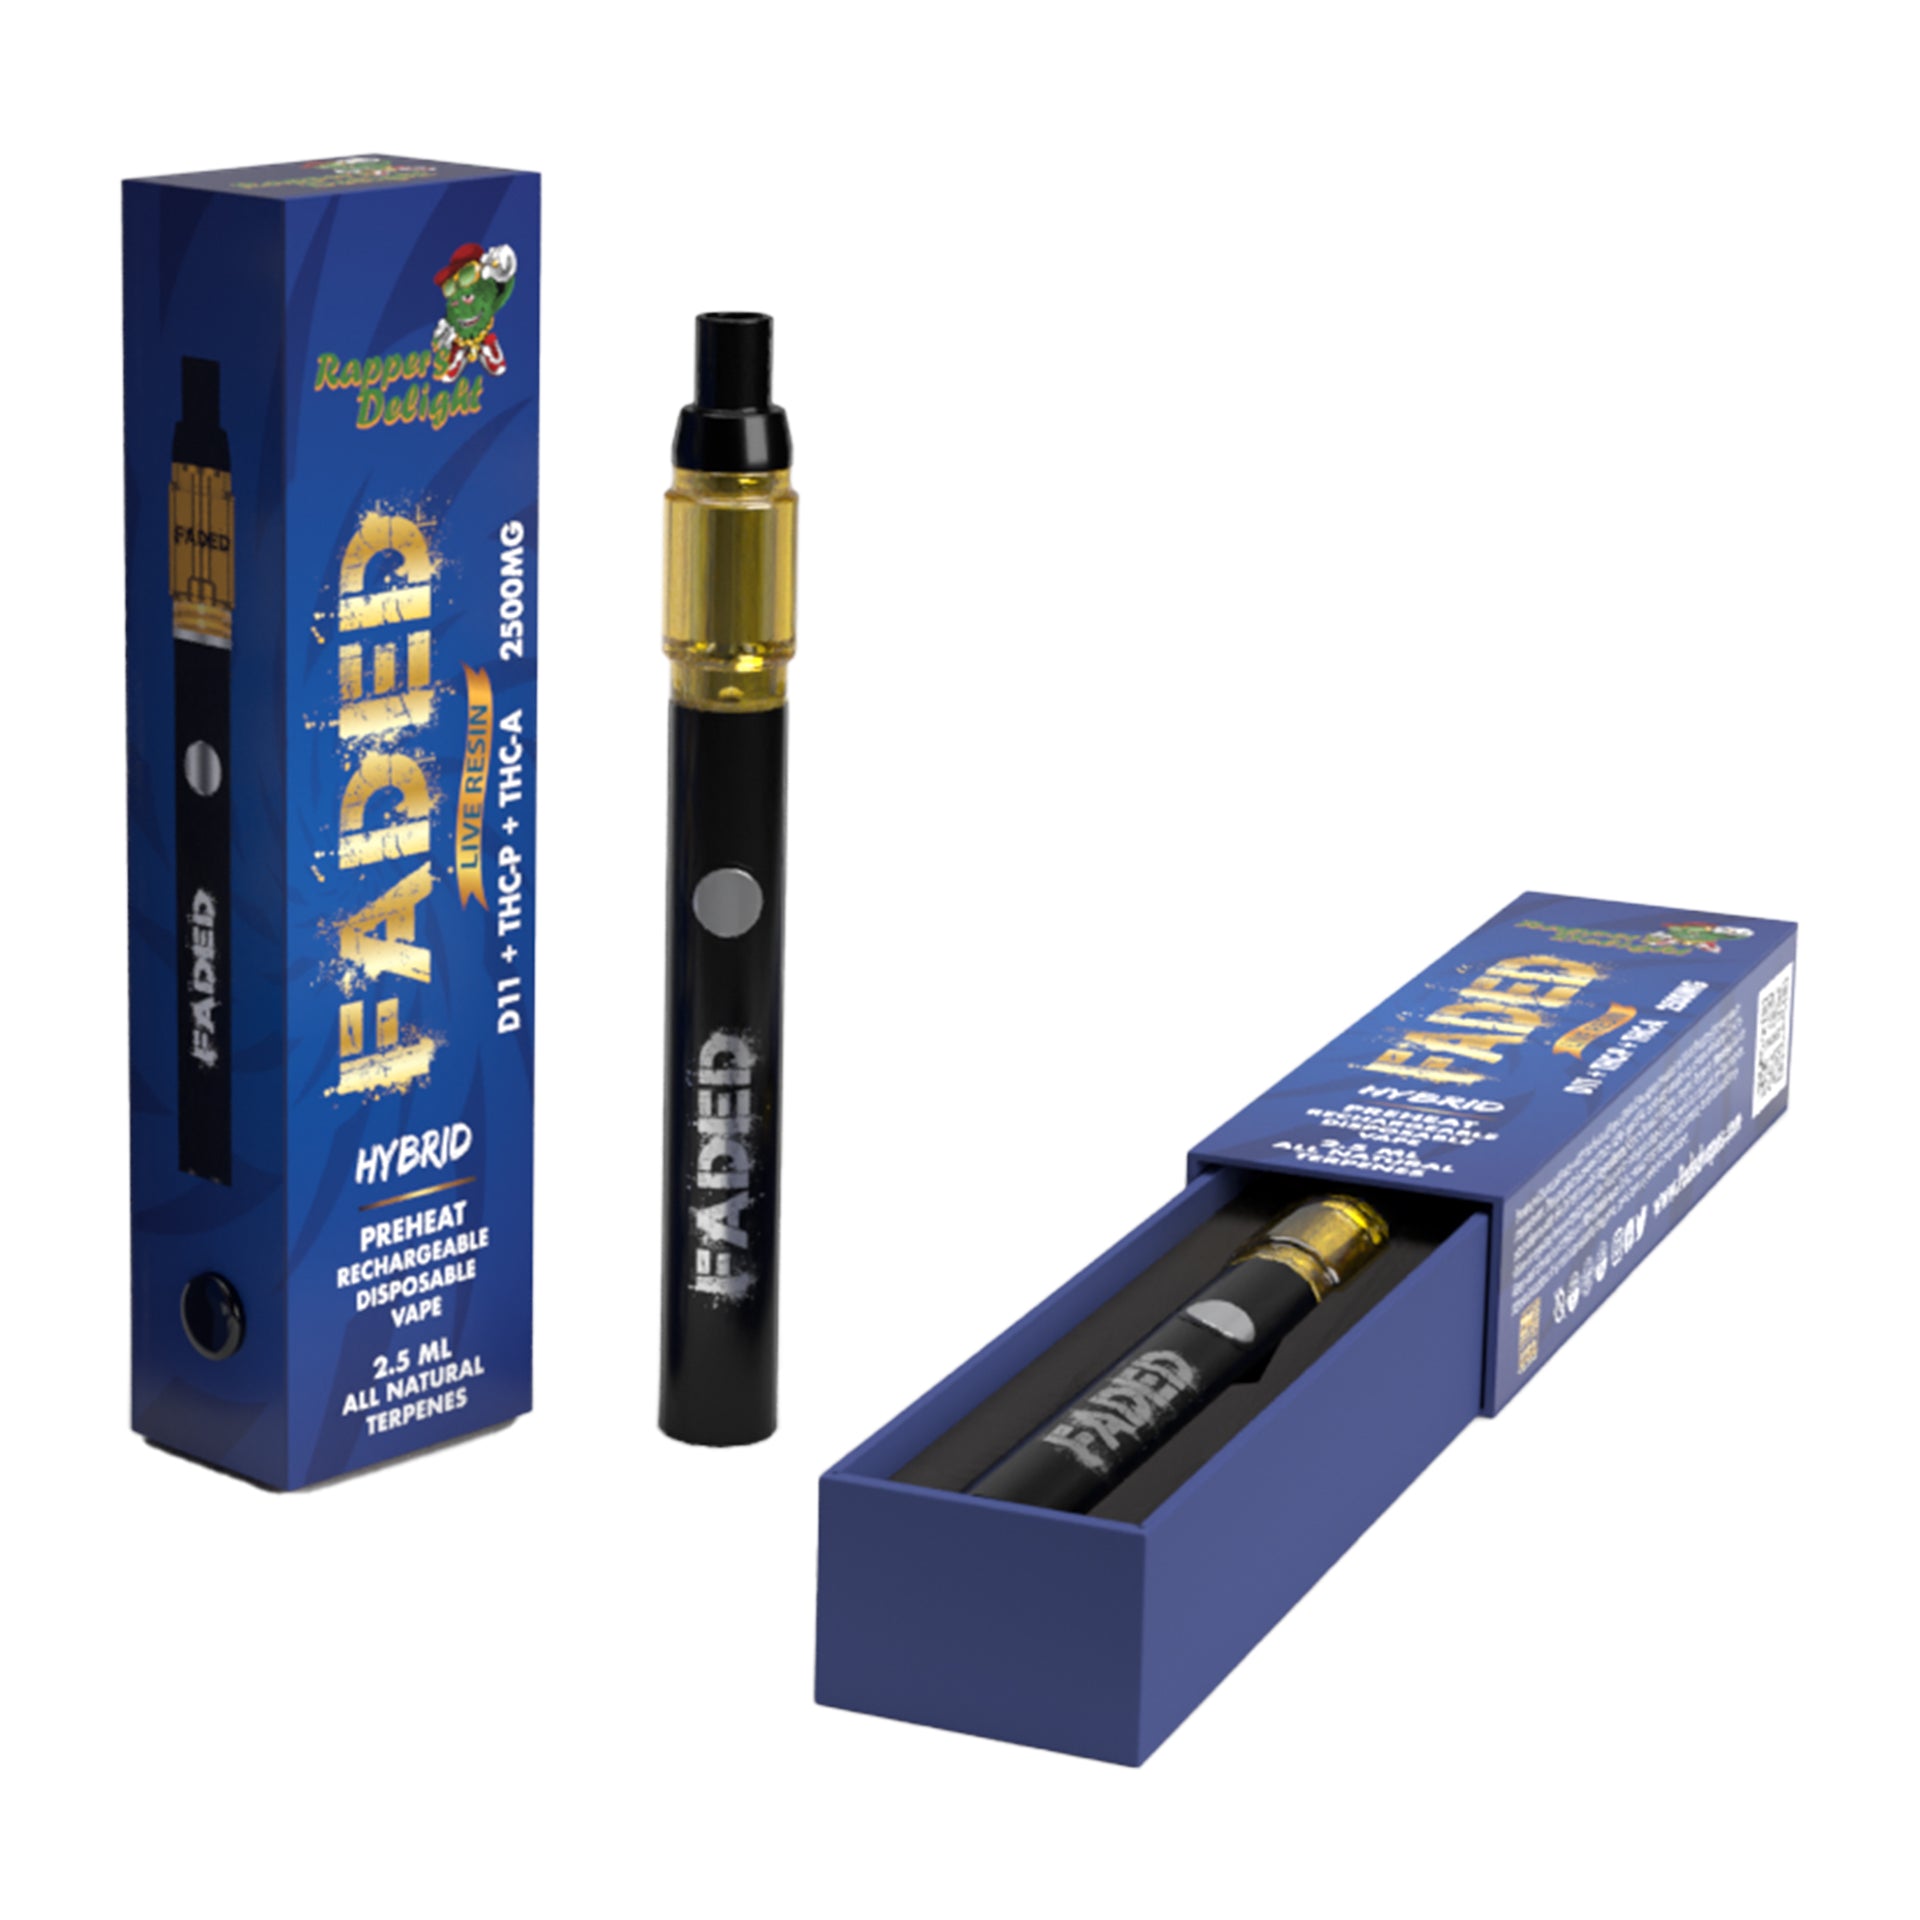 FADED DELTA-11+THC-P+THC-A RECHARGEABLE DISPOSABLE - HYBRID RAPPER'S DELIGHT 2.5ML